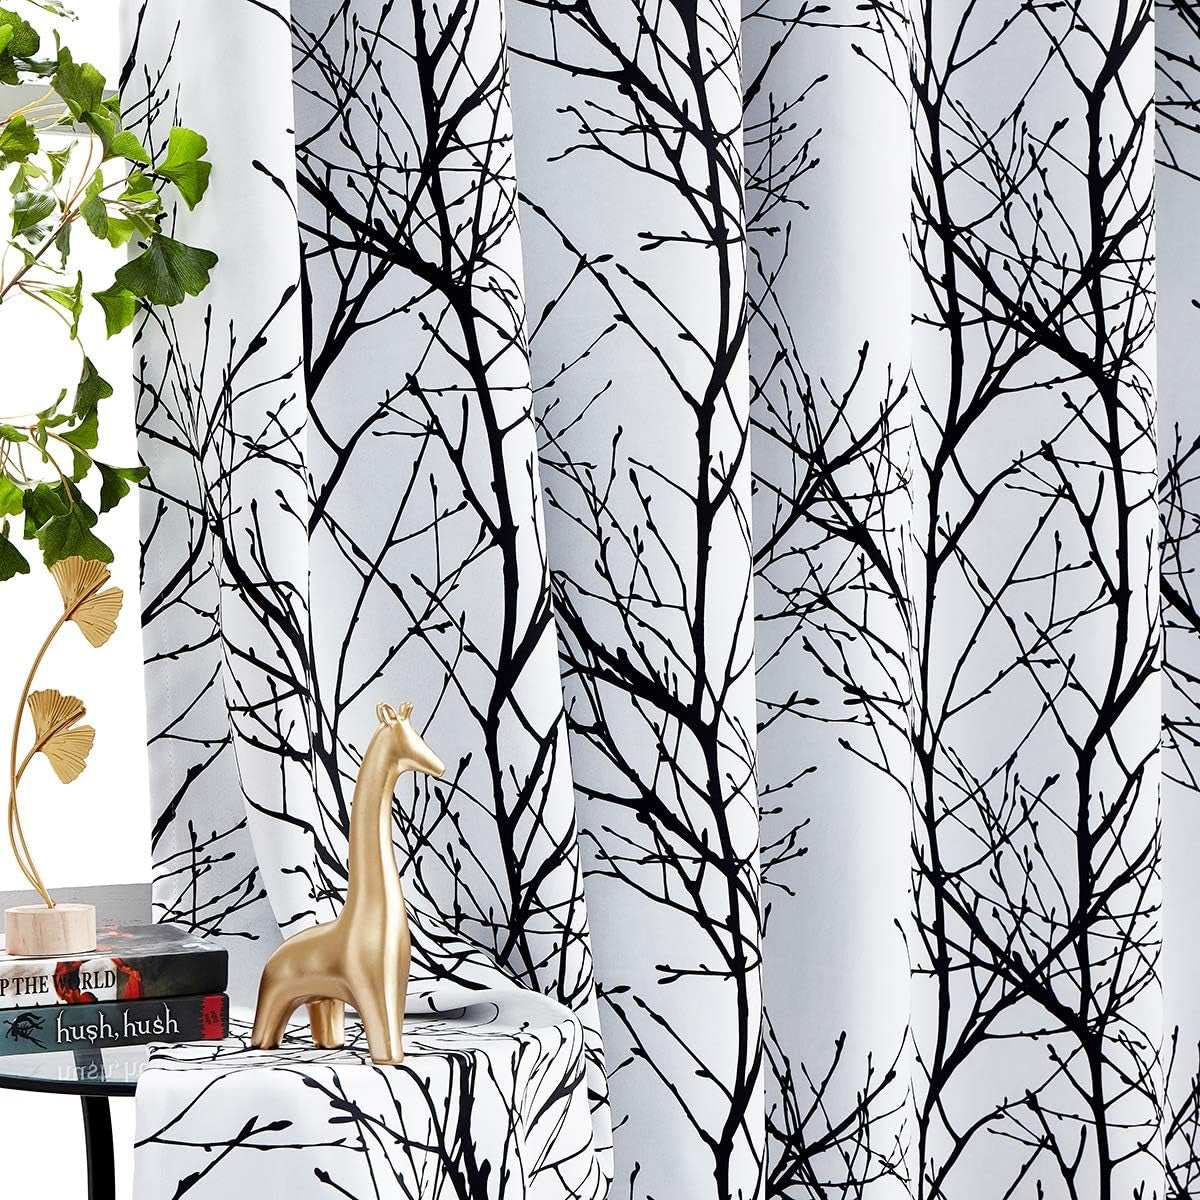 Blue White Blackout Curtains for Bedroom 63" Length Tonal Blue Grey Tree Branch Print Thermal Insulated Full Blackout Curtain Panels for Living Room Triple Weave Window Drapes 50"W 2Panels Grommet Top  Fmfunctex Blackout-Black 50"W X 96"L 2Pcs 